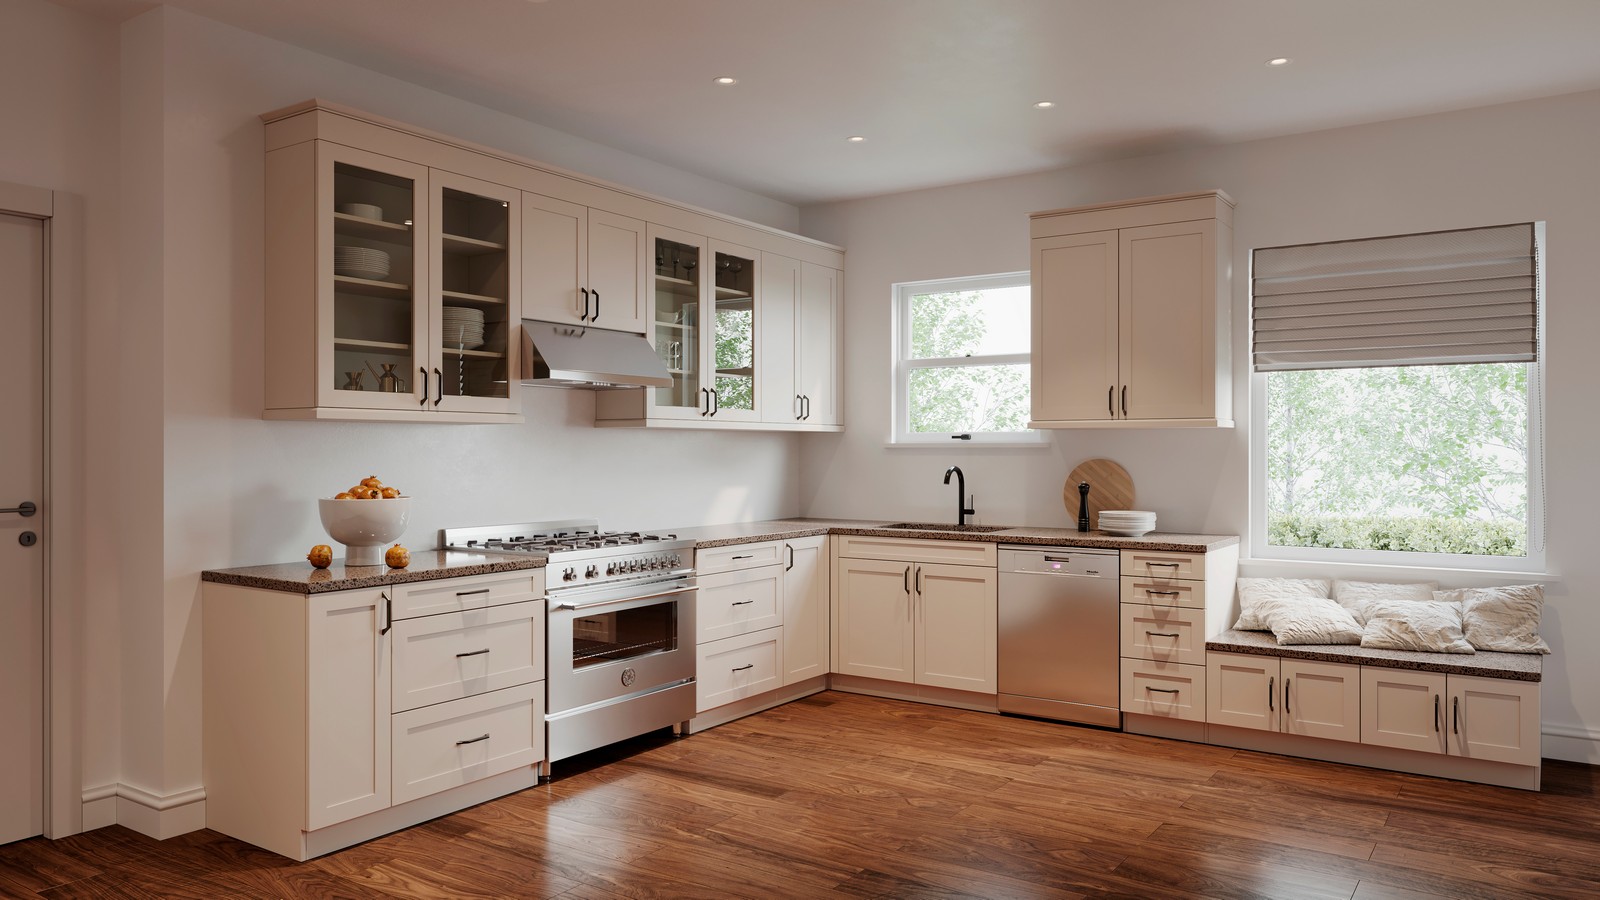 Kitchen Beauty Shots Showcasing The Cabinetry Style - , 5